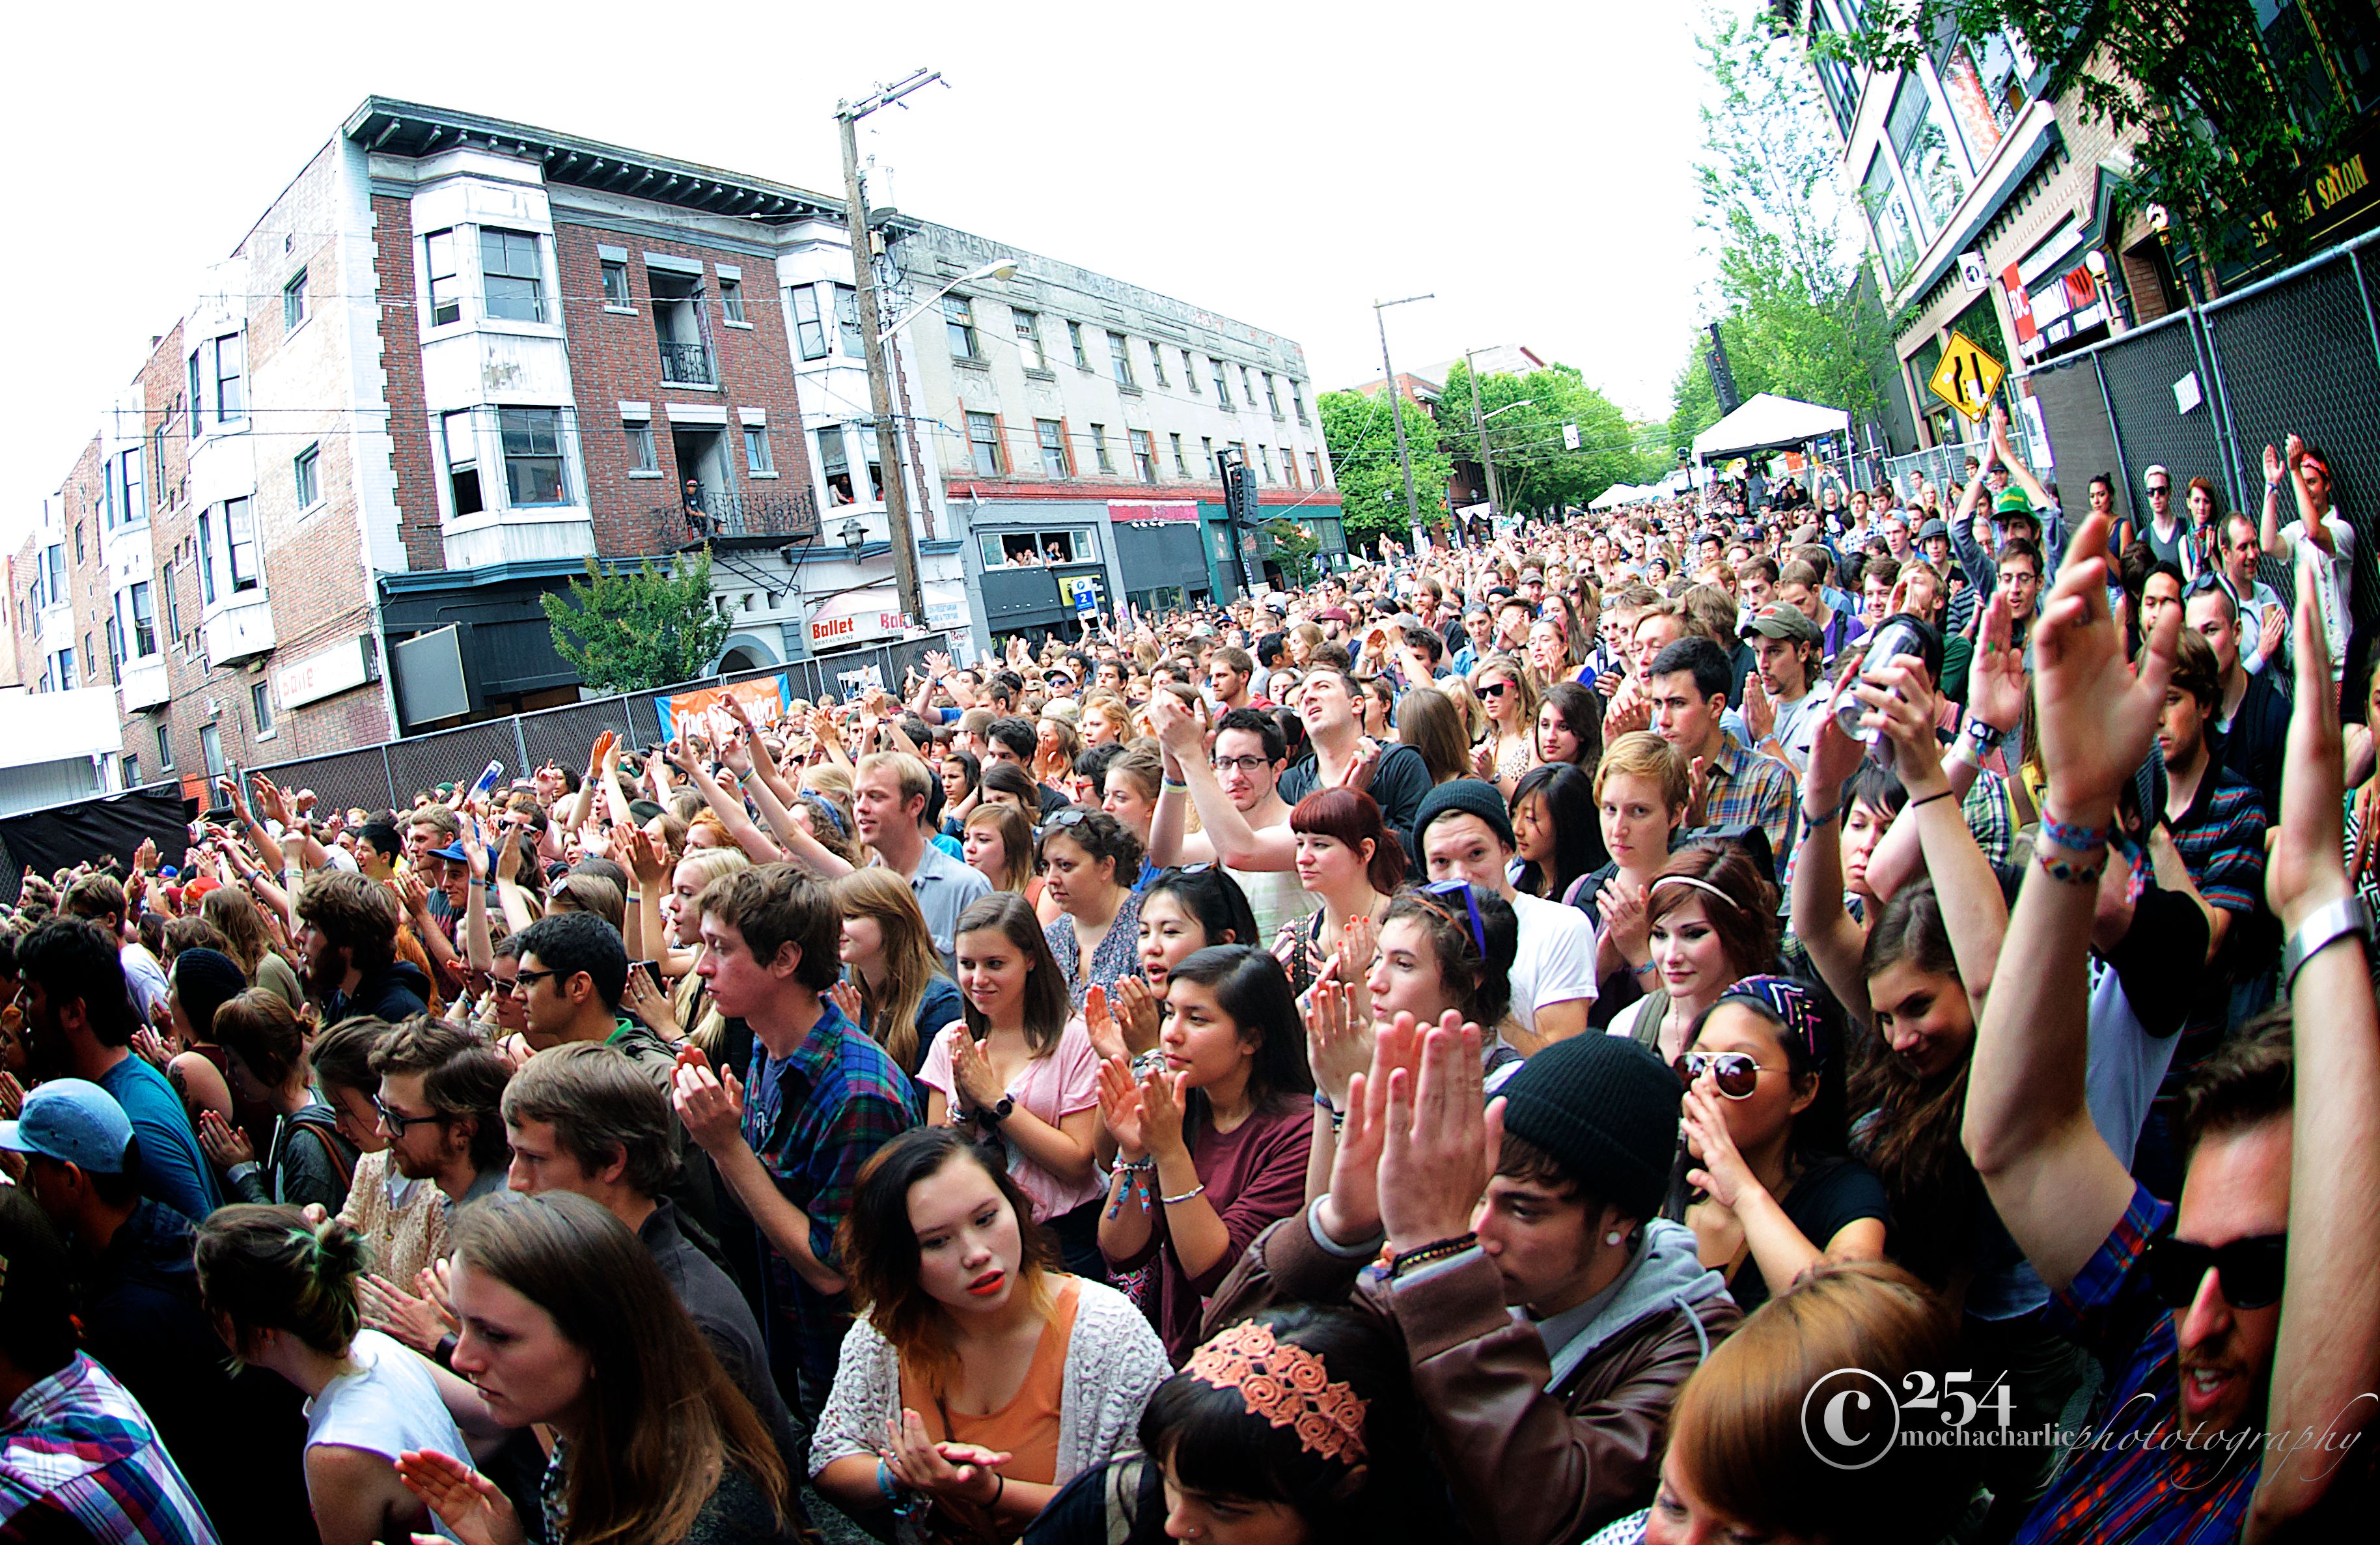 Capitol Hill Block Party 2012: Day 1